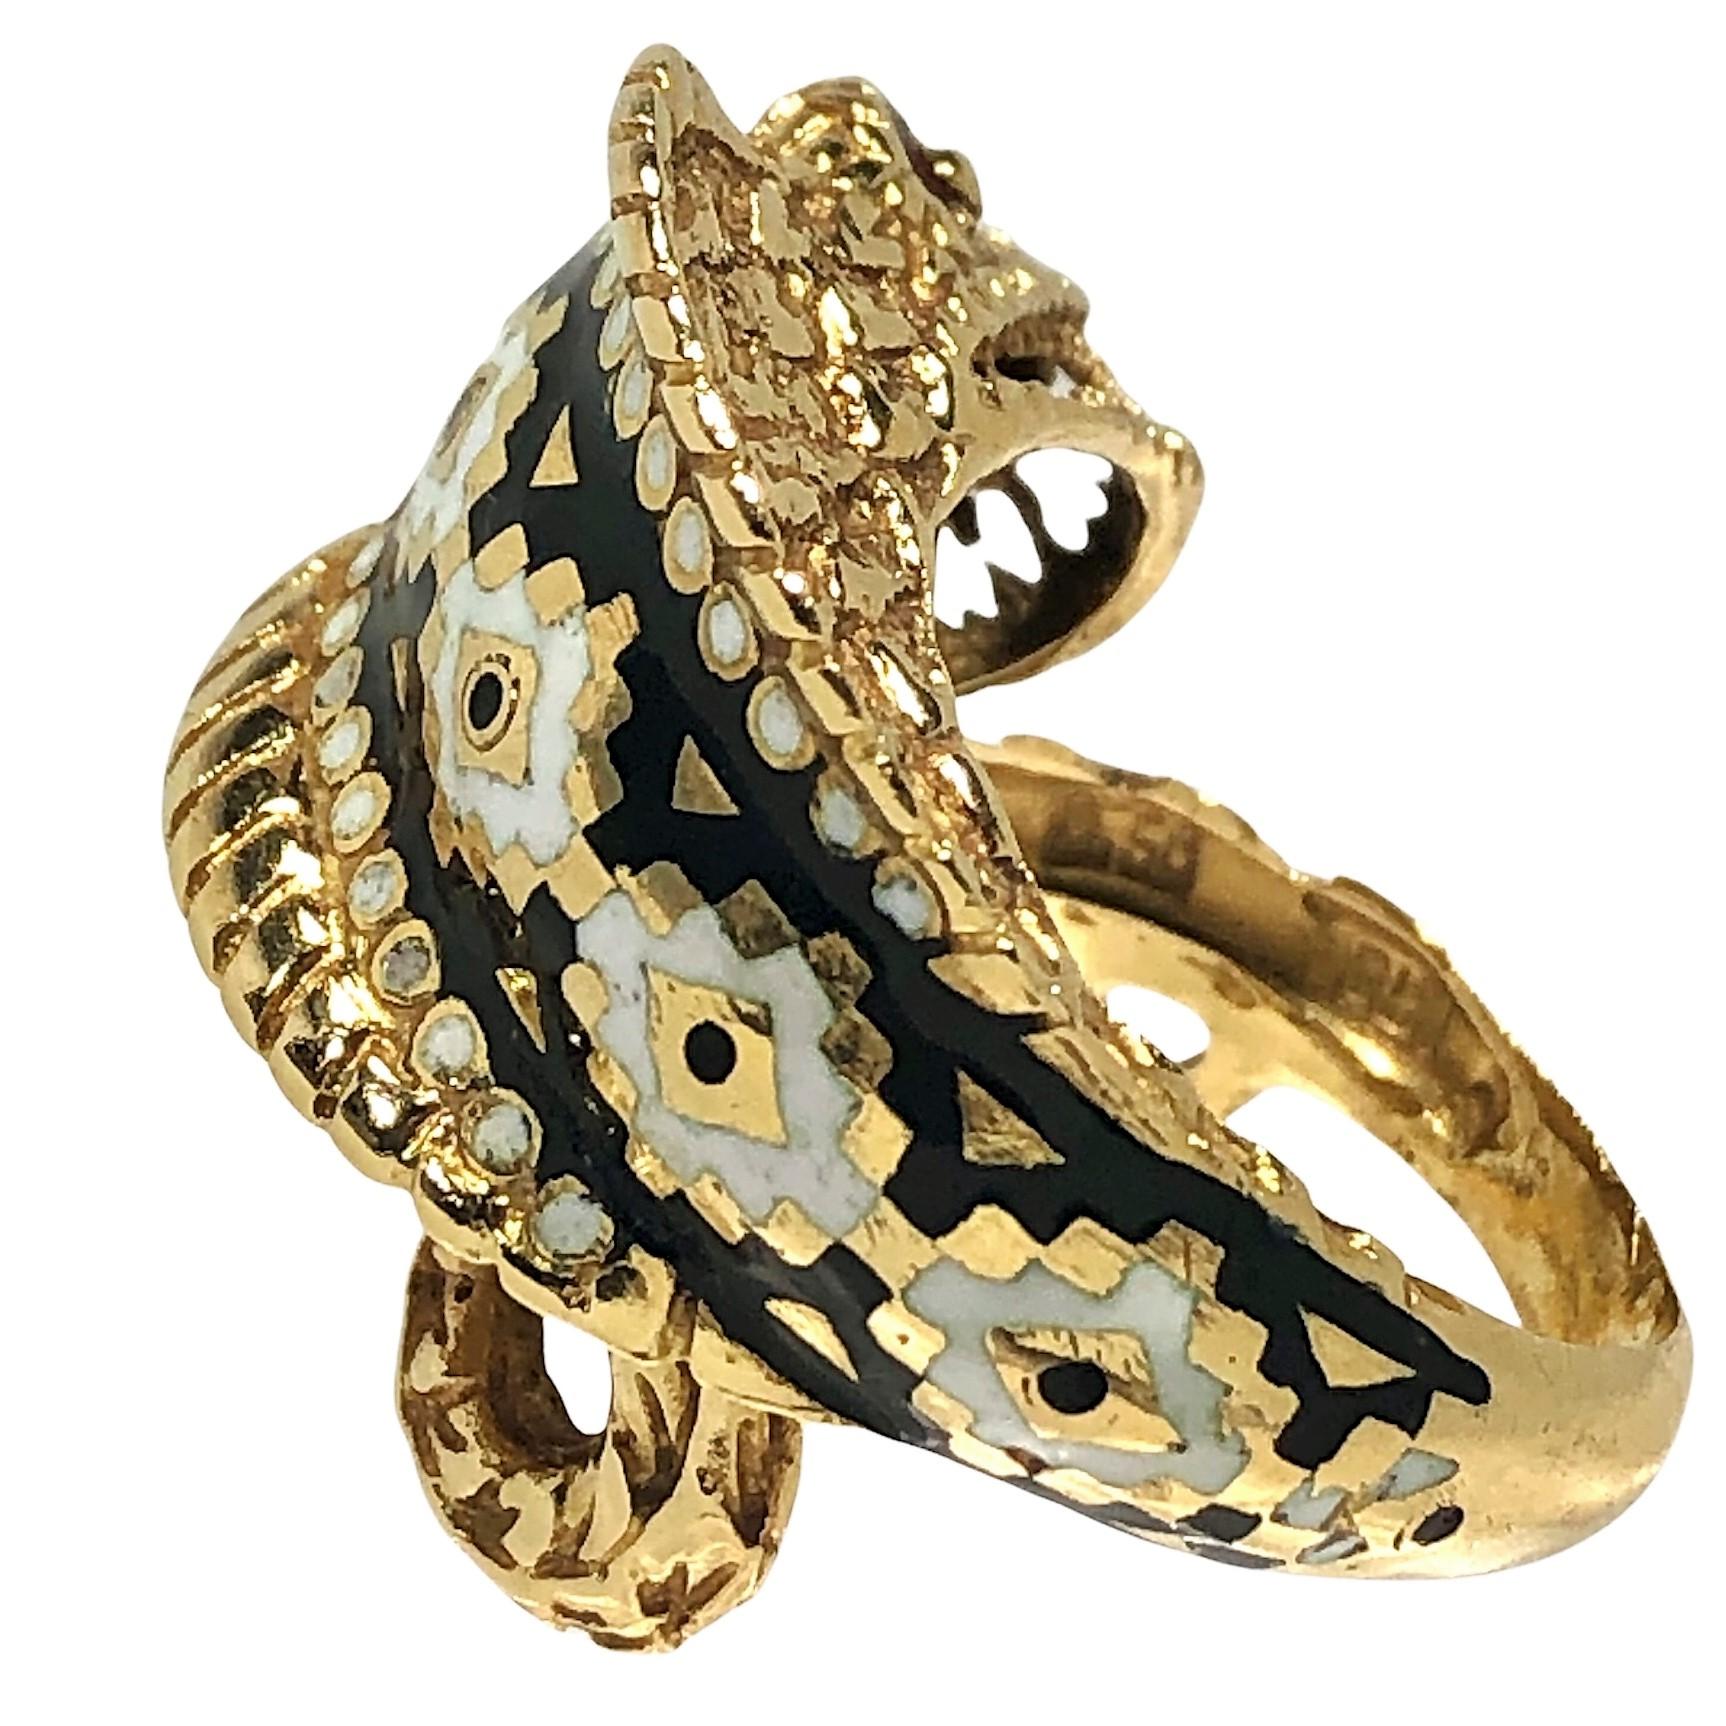 King Cobra Snake Ring in 18k Yellow Gold with Multi Color Enamel Markings In Good Condition For Sale In Palm Beach, FL